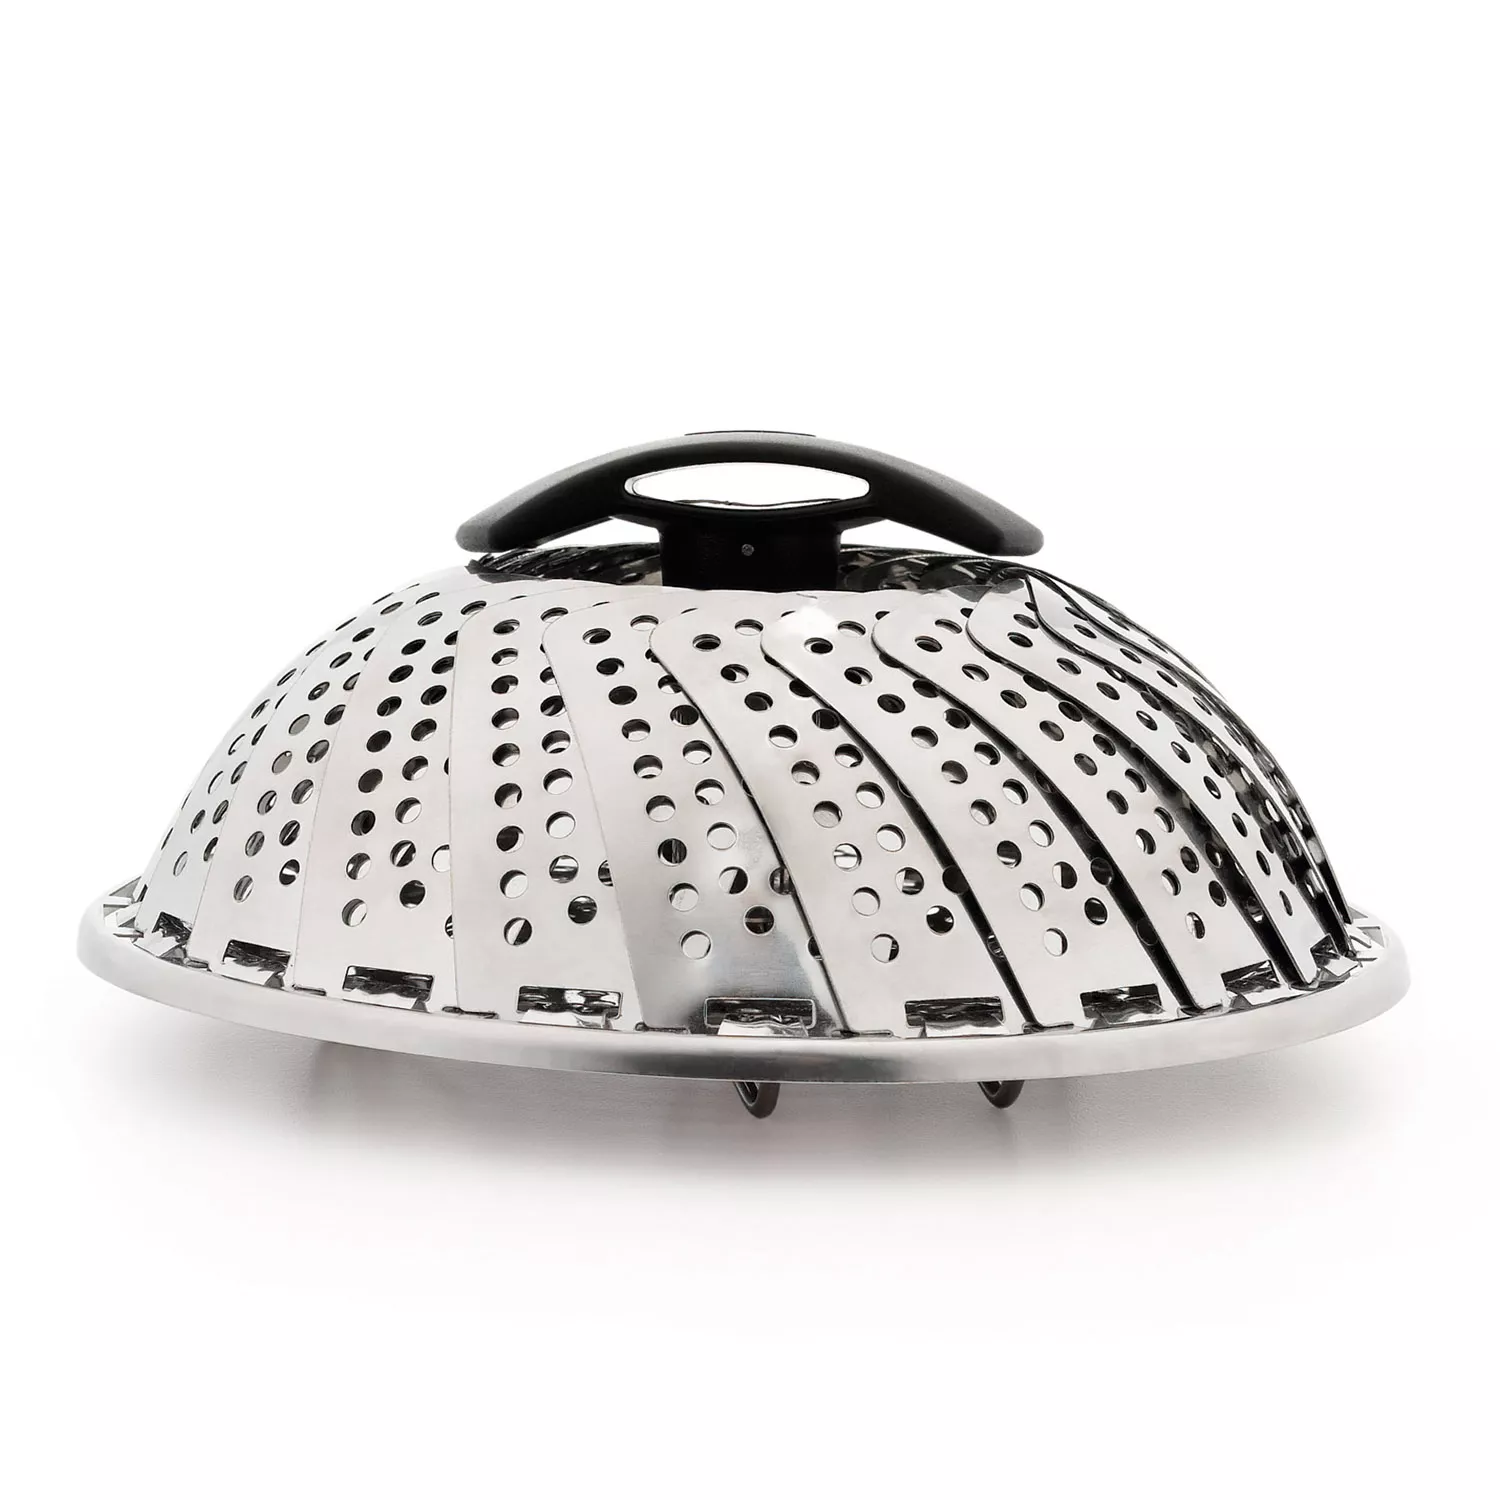 1 Stainless Steel Steamer Tray Coaster + 1 Egg Holder 9 Holes With